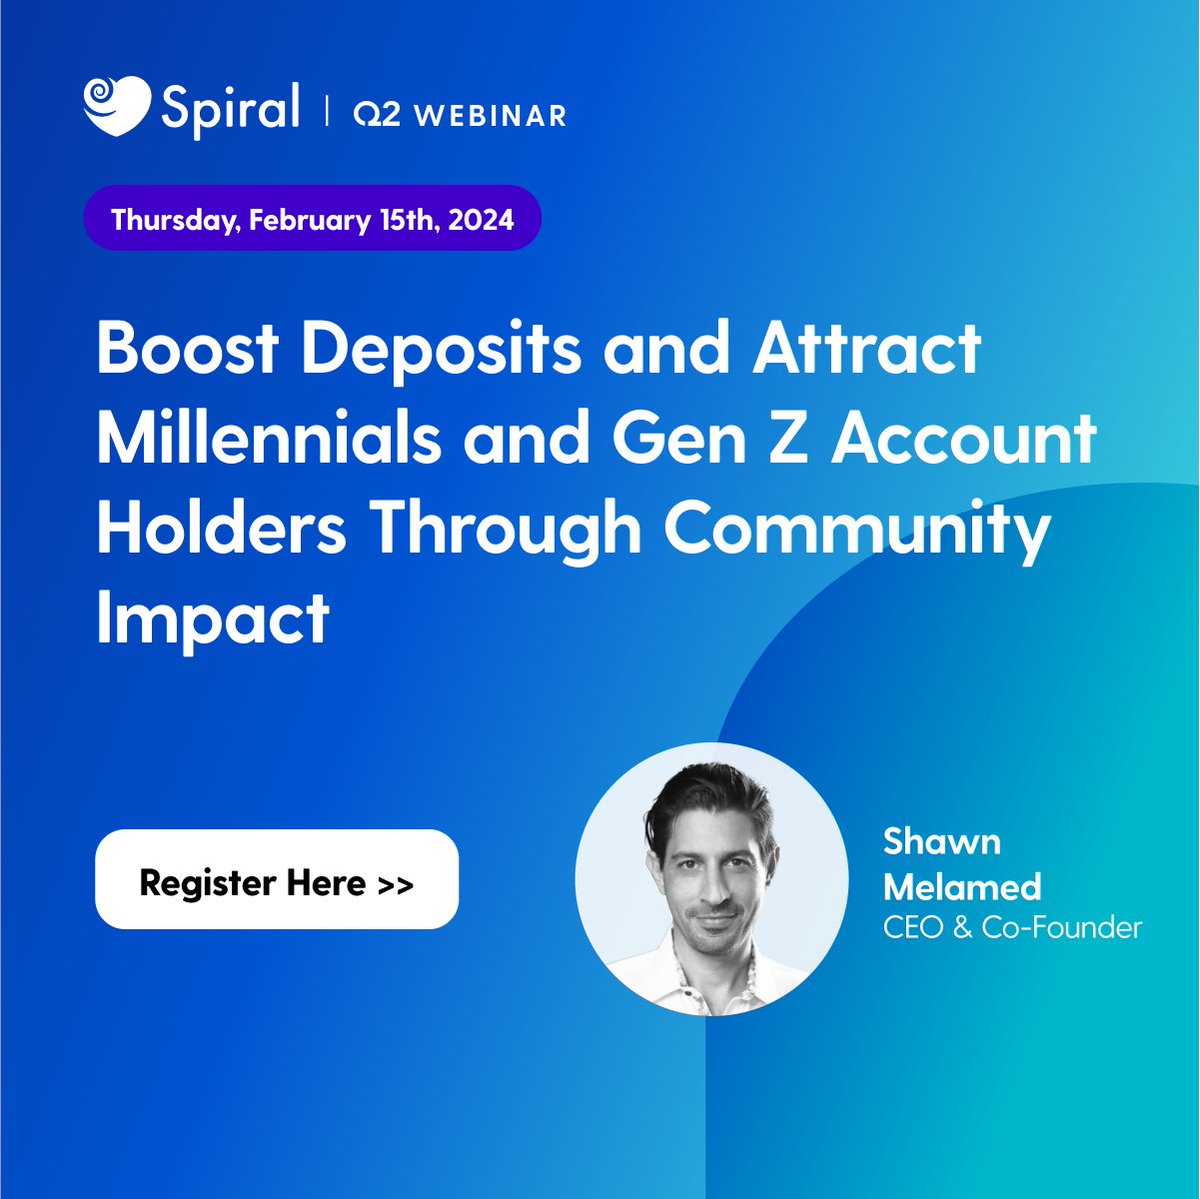 We’re only 3 days away from our exclusive session with Spiral’s CEO, Shawn Melamed! ⏰ Join us to learn how financial institutions can use new solutions in Q2 to grow deposits and engage new accounts via community and environmental impact. 🌿 👉 bit.ly/q2wbnr